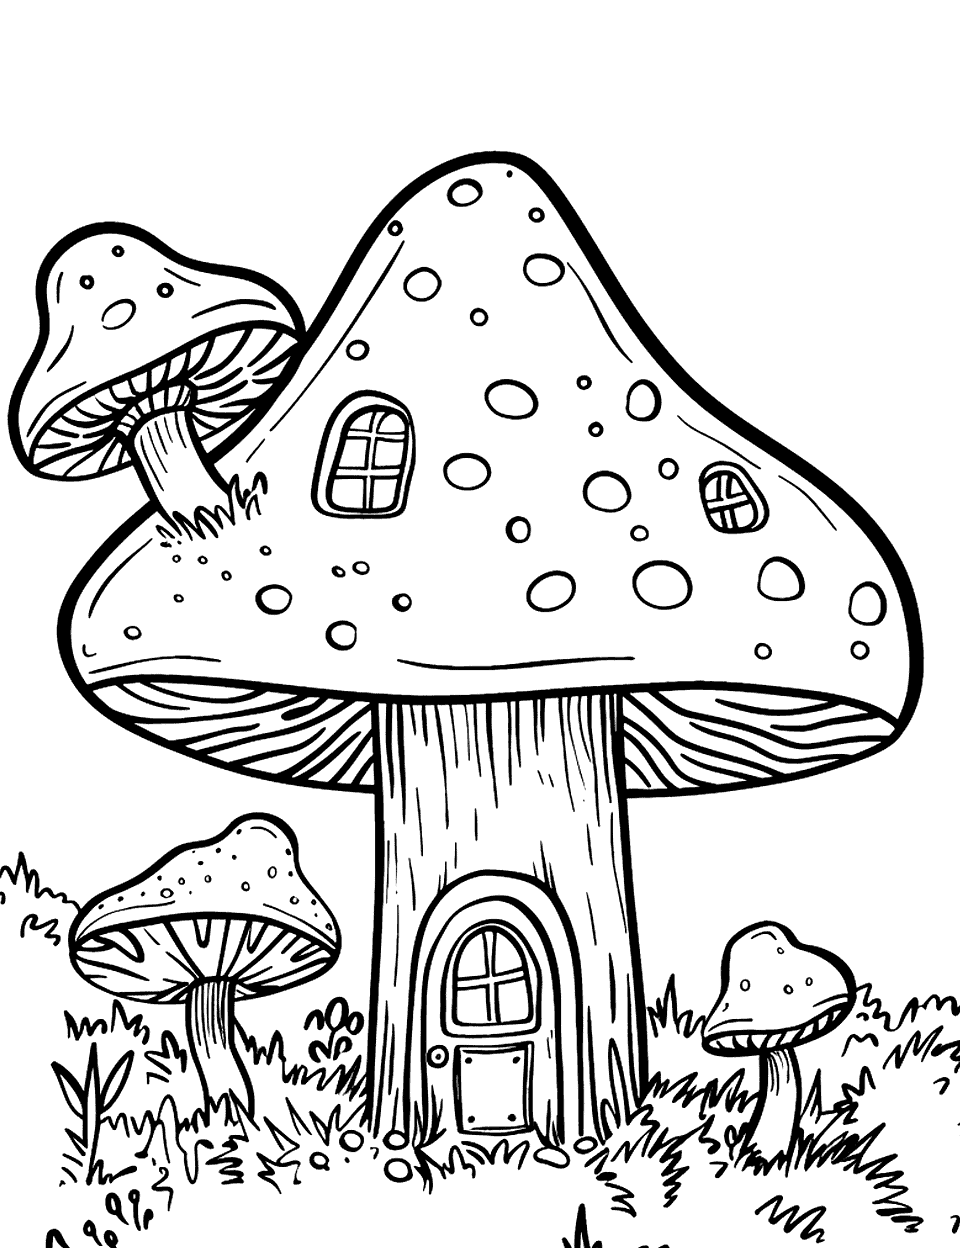 Mushroom House Coloring Page - A mushroom styled as a small house, with a door and windows.